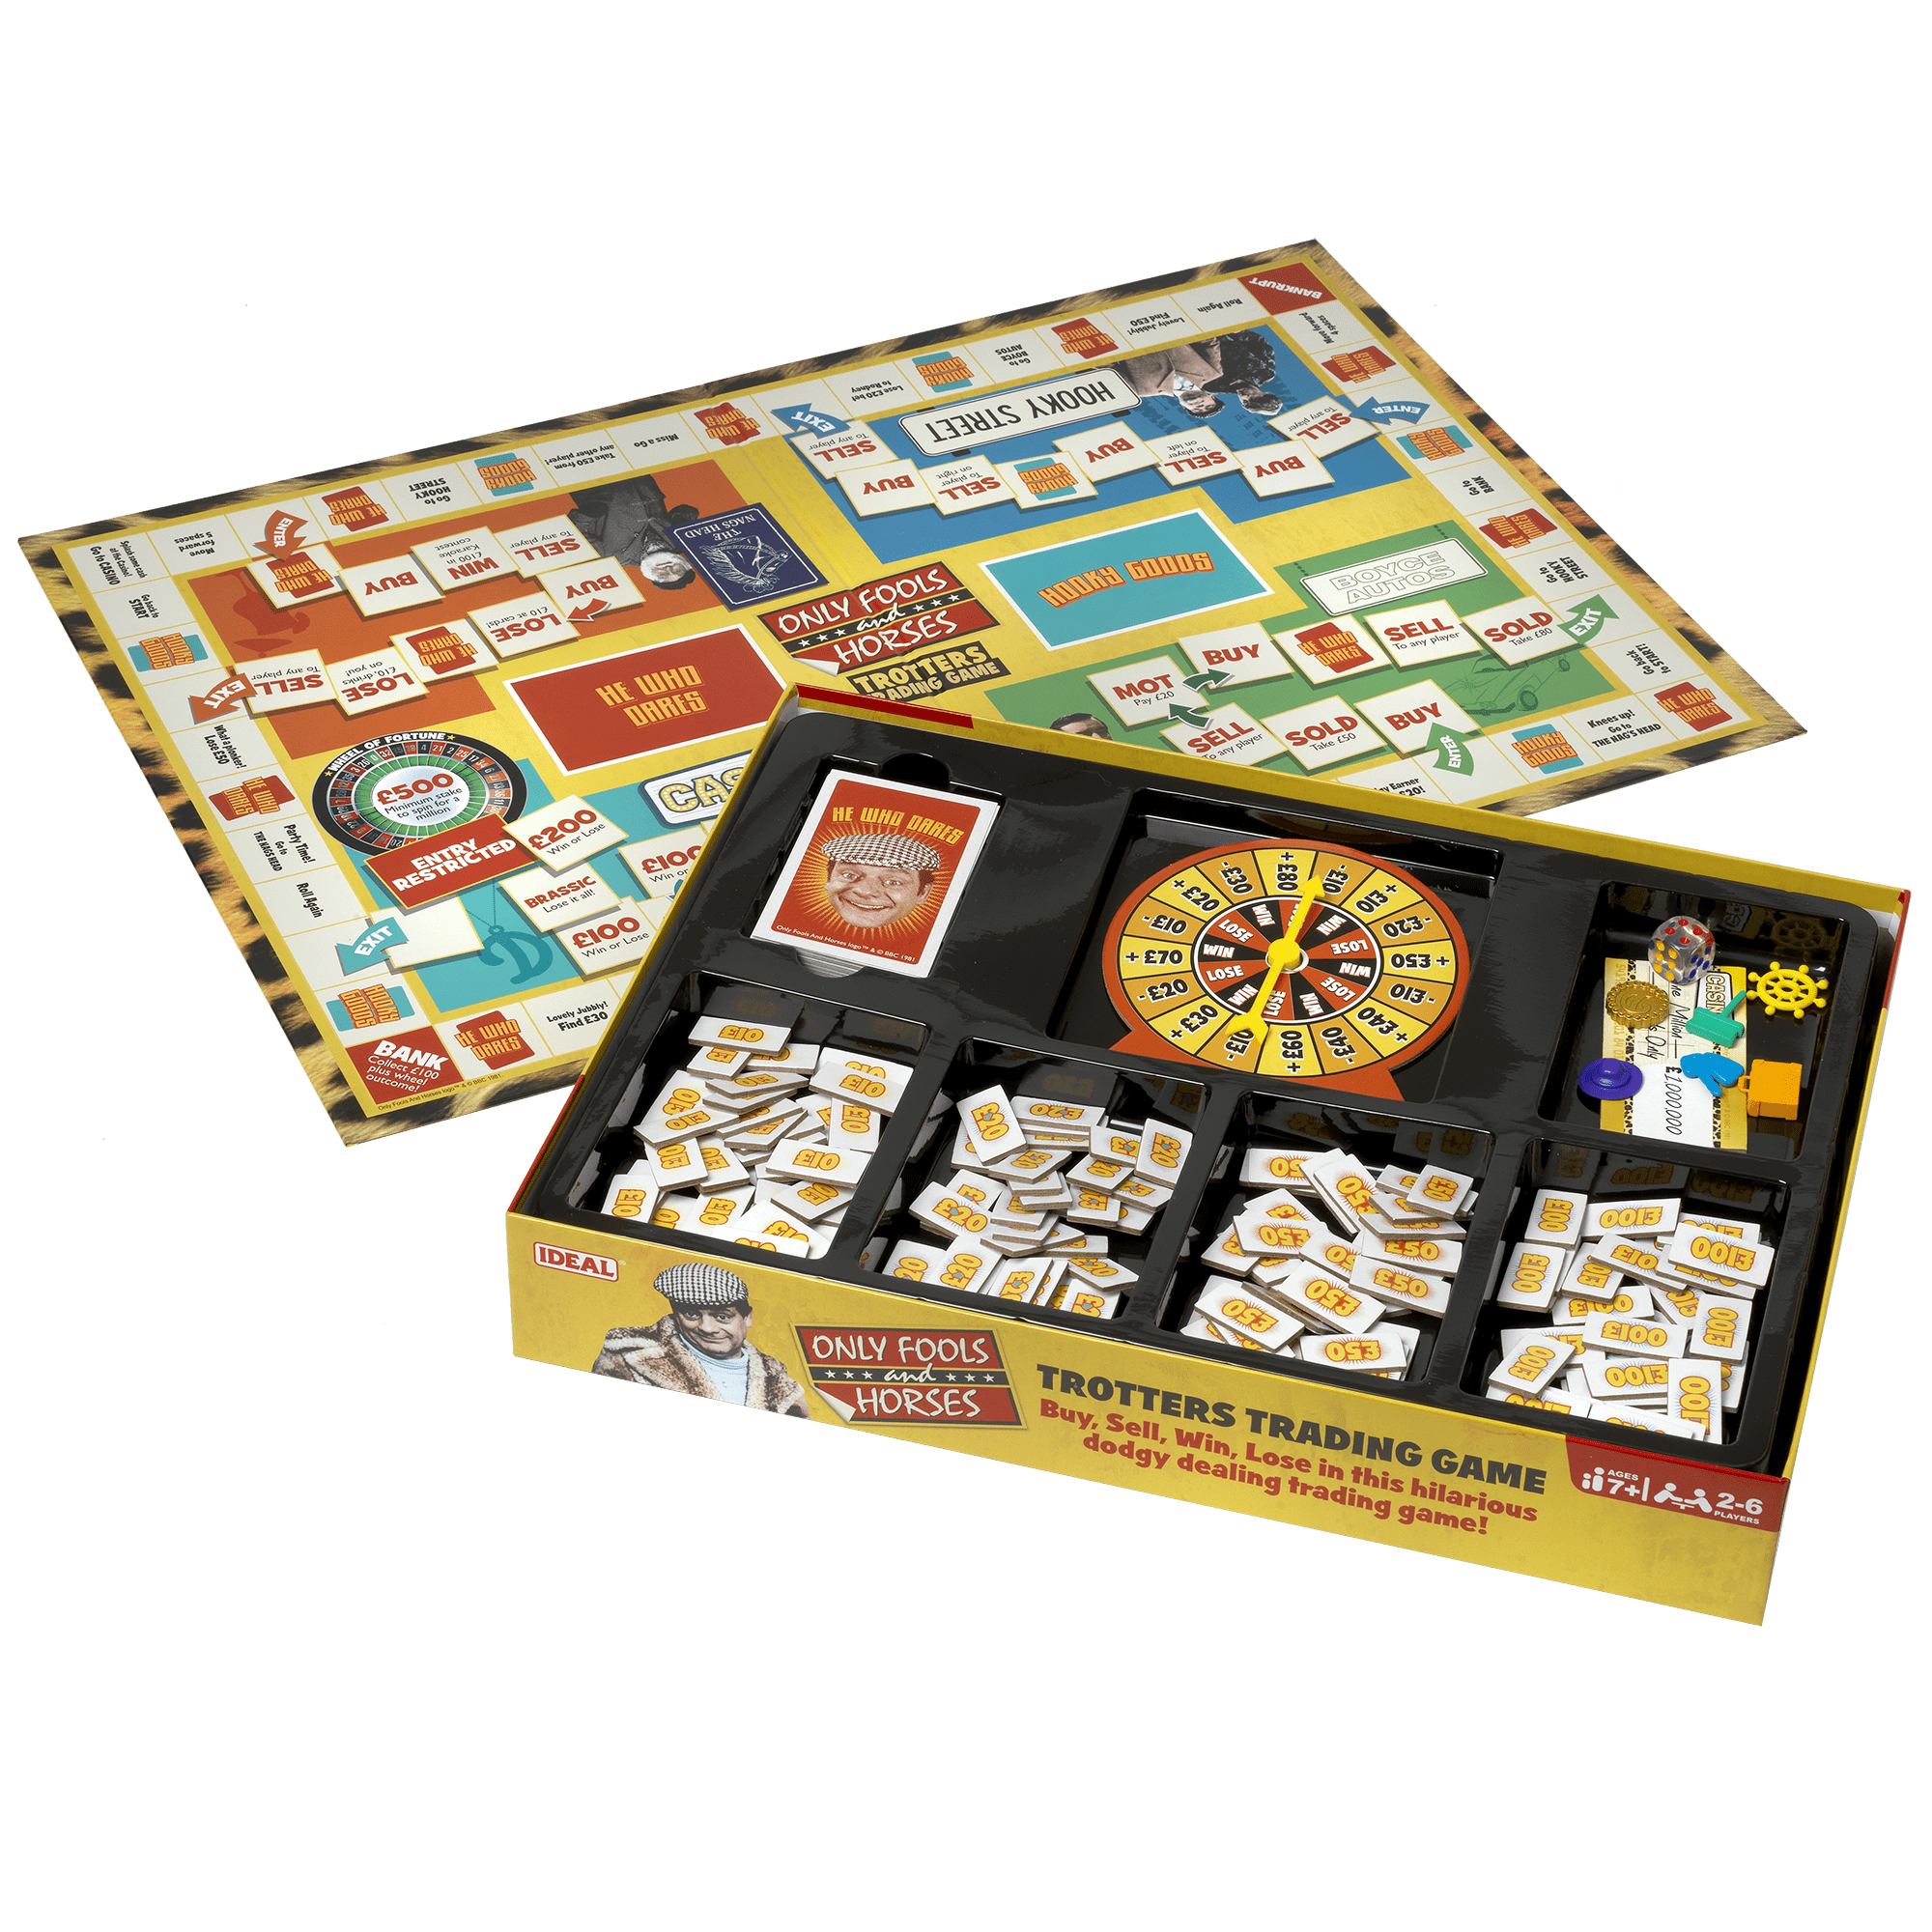 035927 Only Fools and Horses Board Games One size 